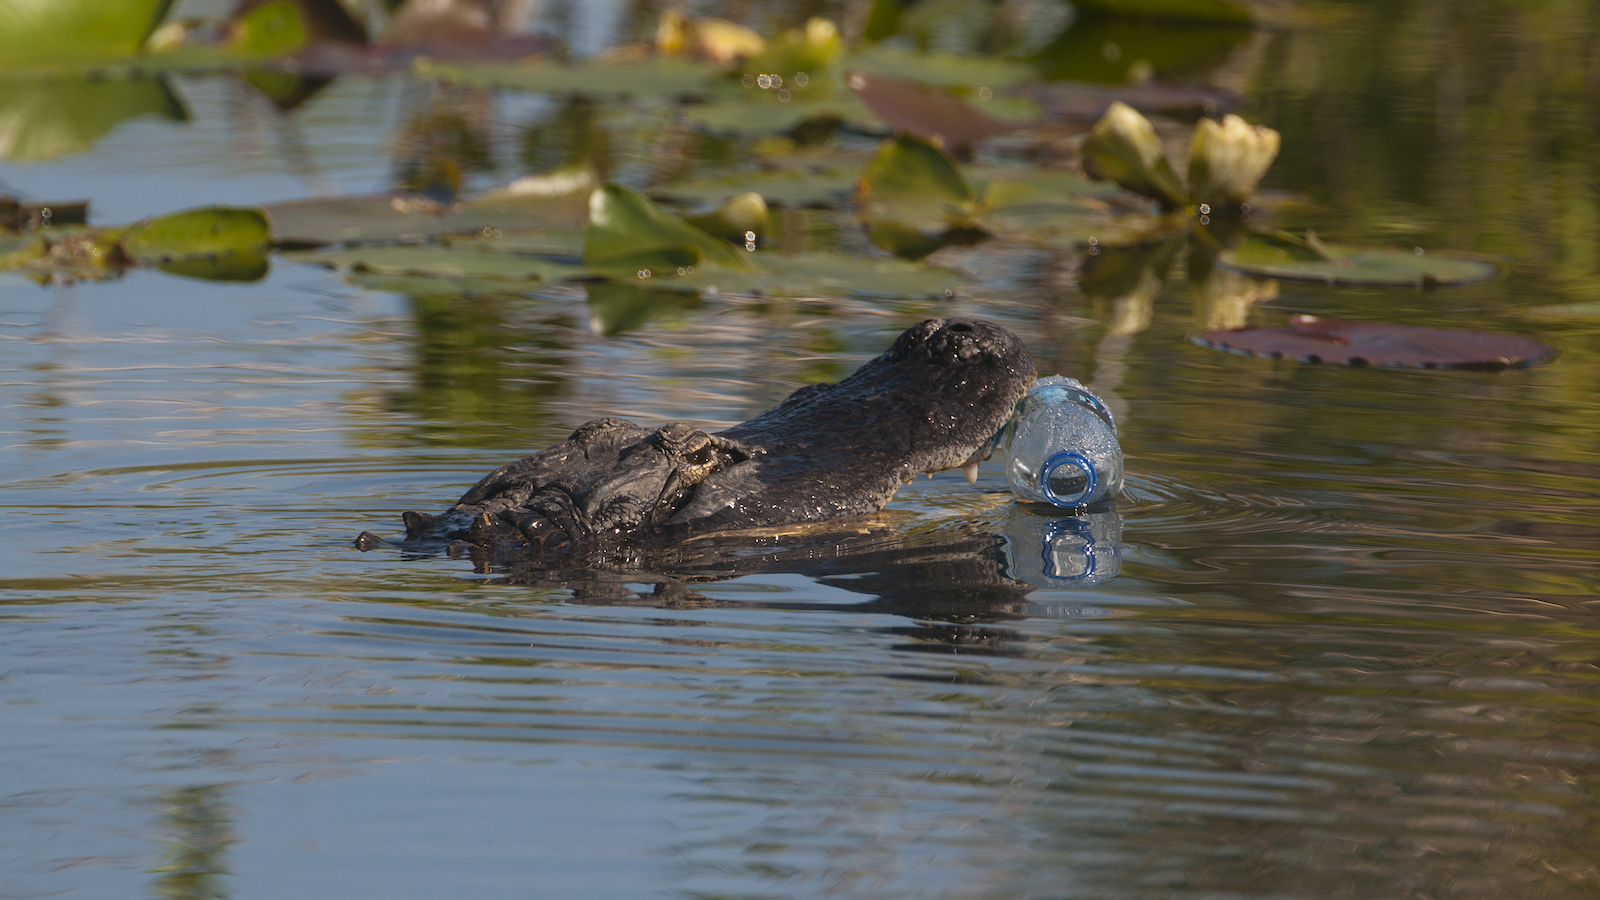 An alligator attempts to eat a plastic water bottle